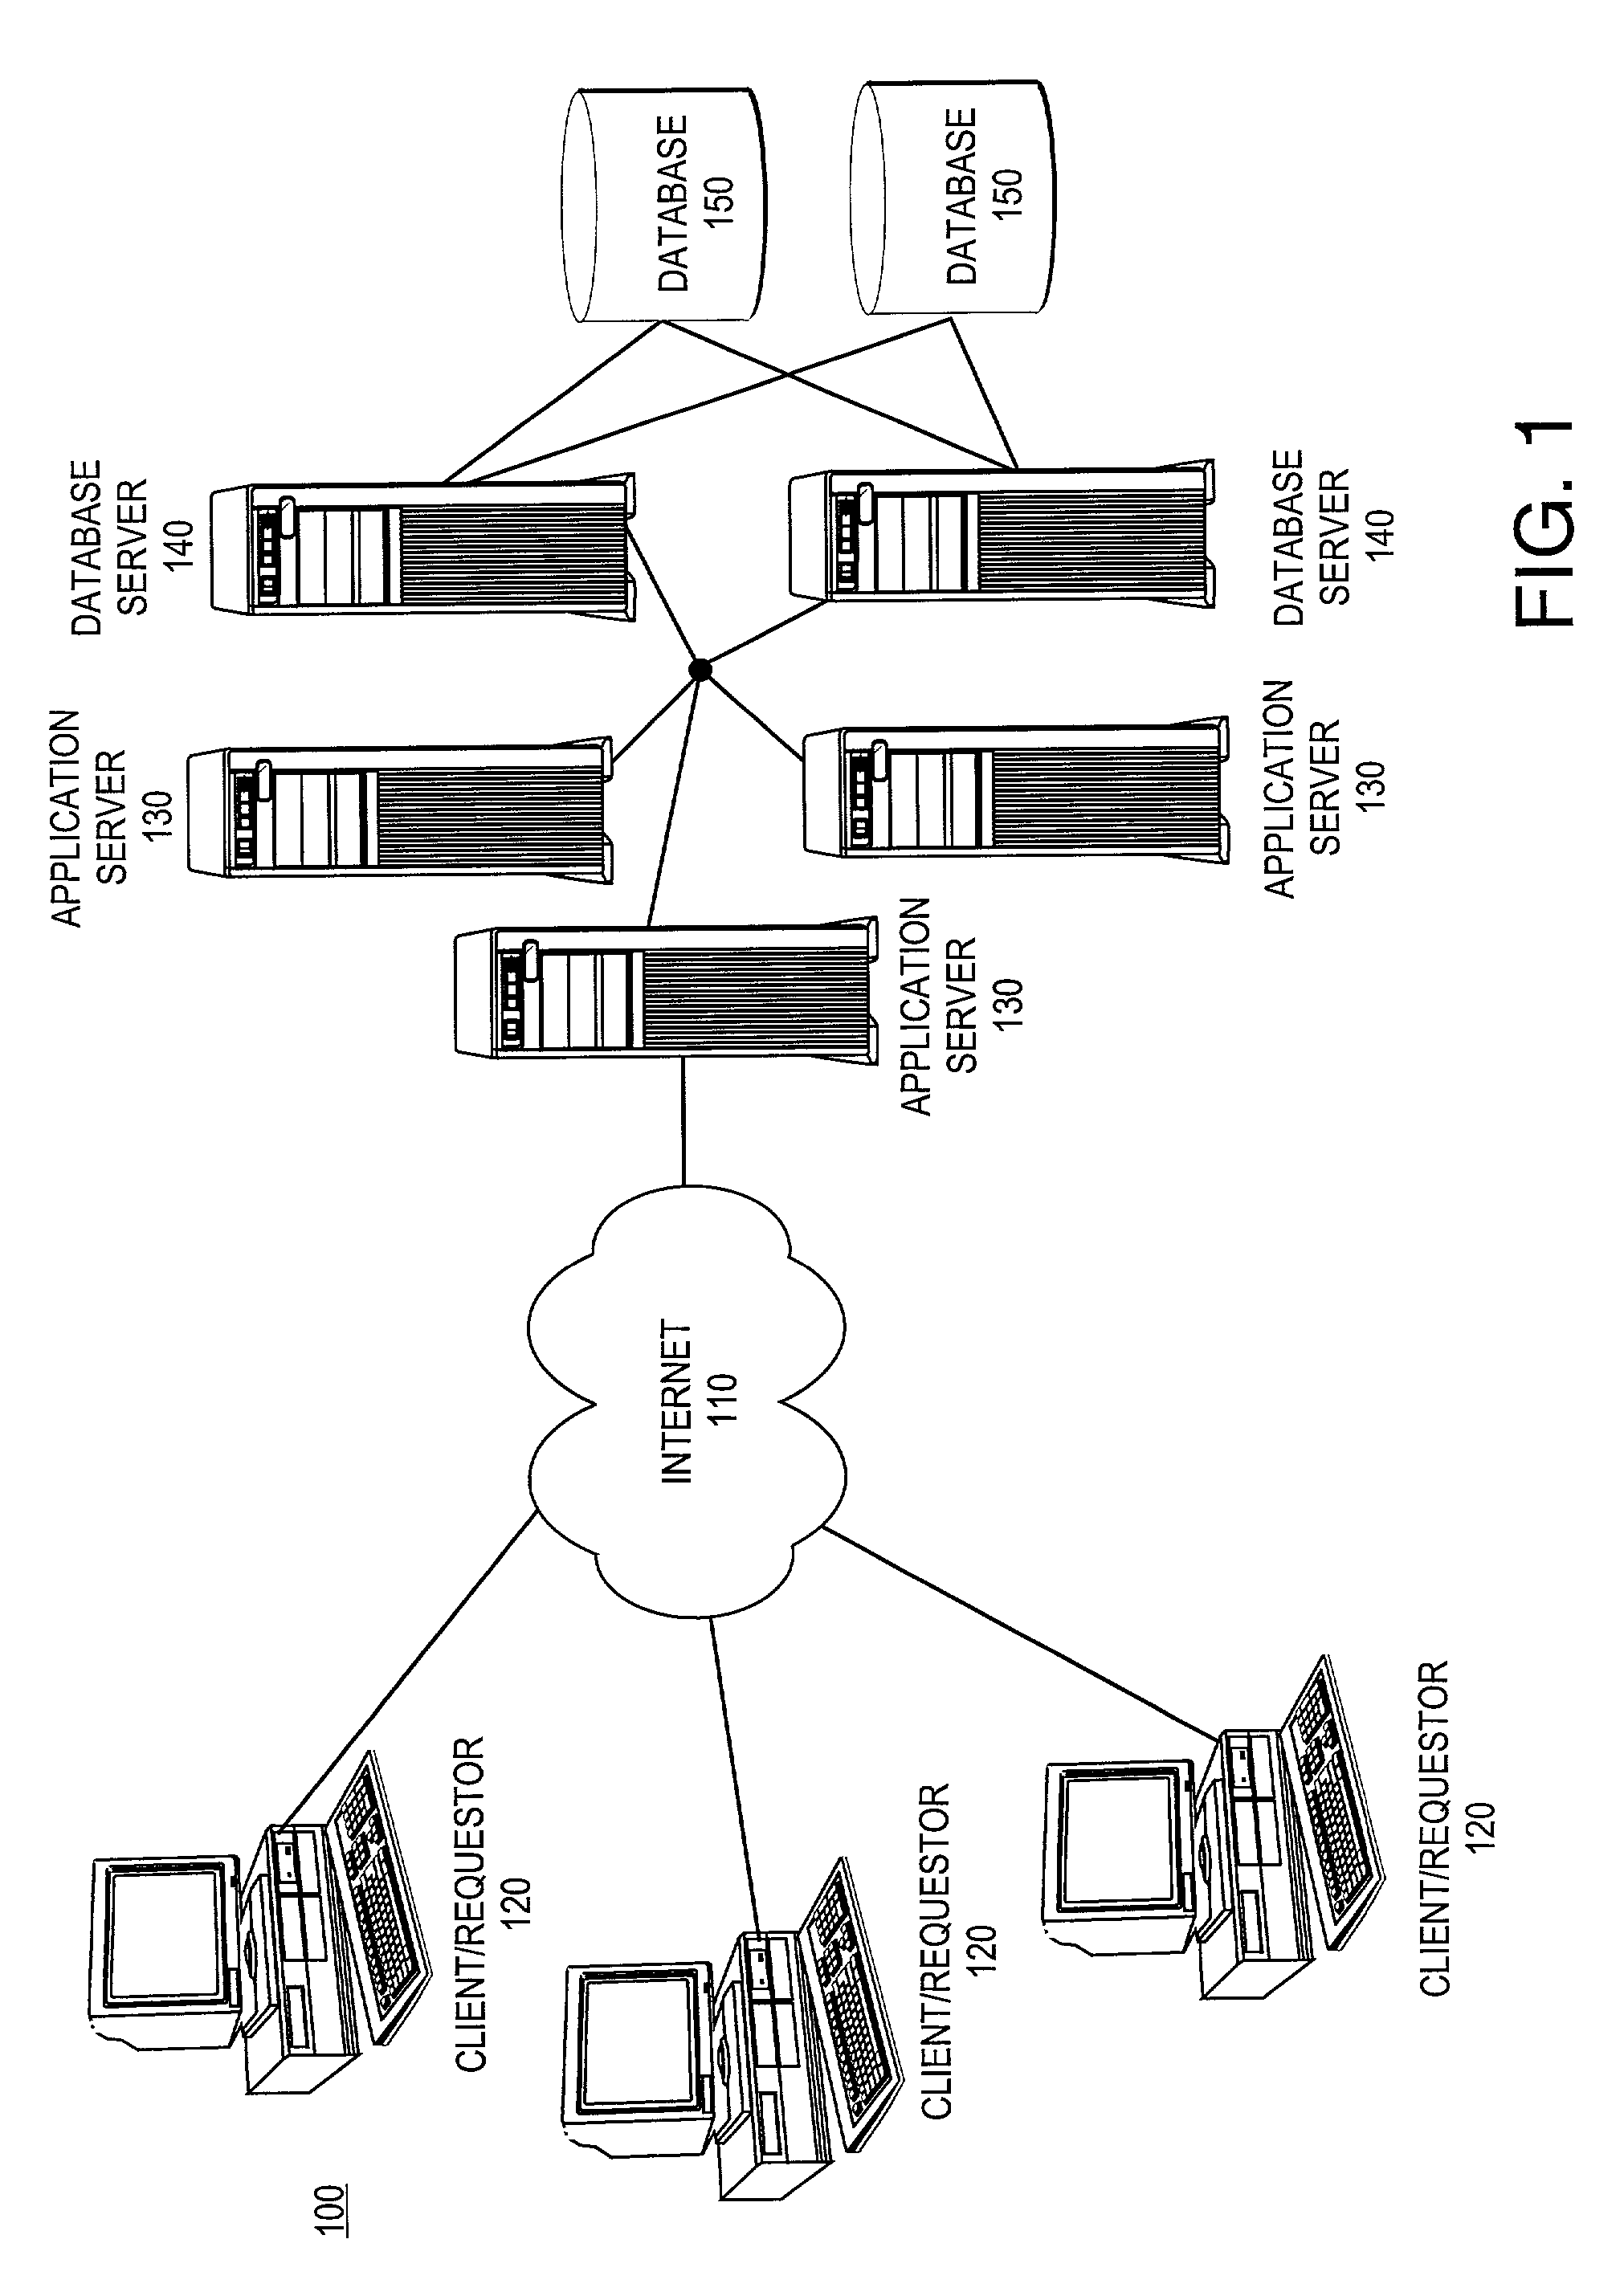 Fast failover database tier in a multi-tier transaction processing system